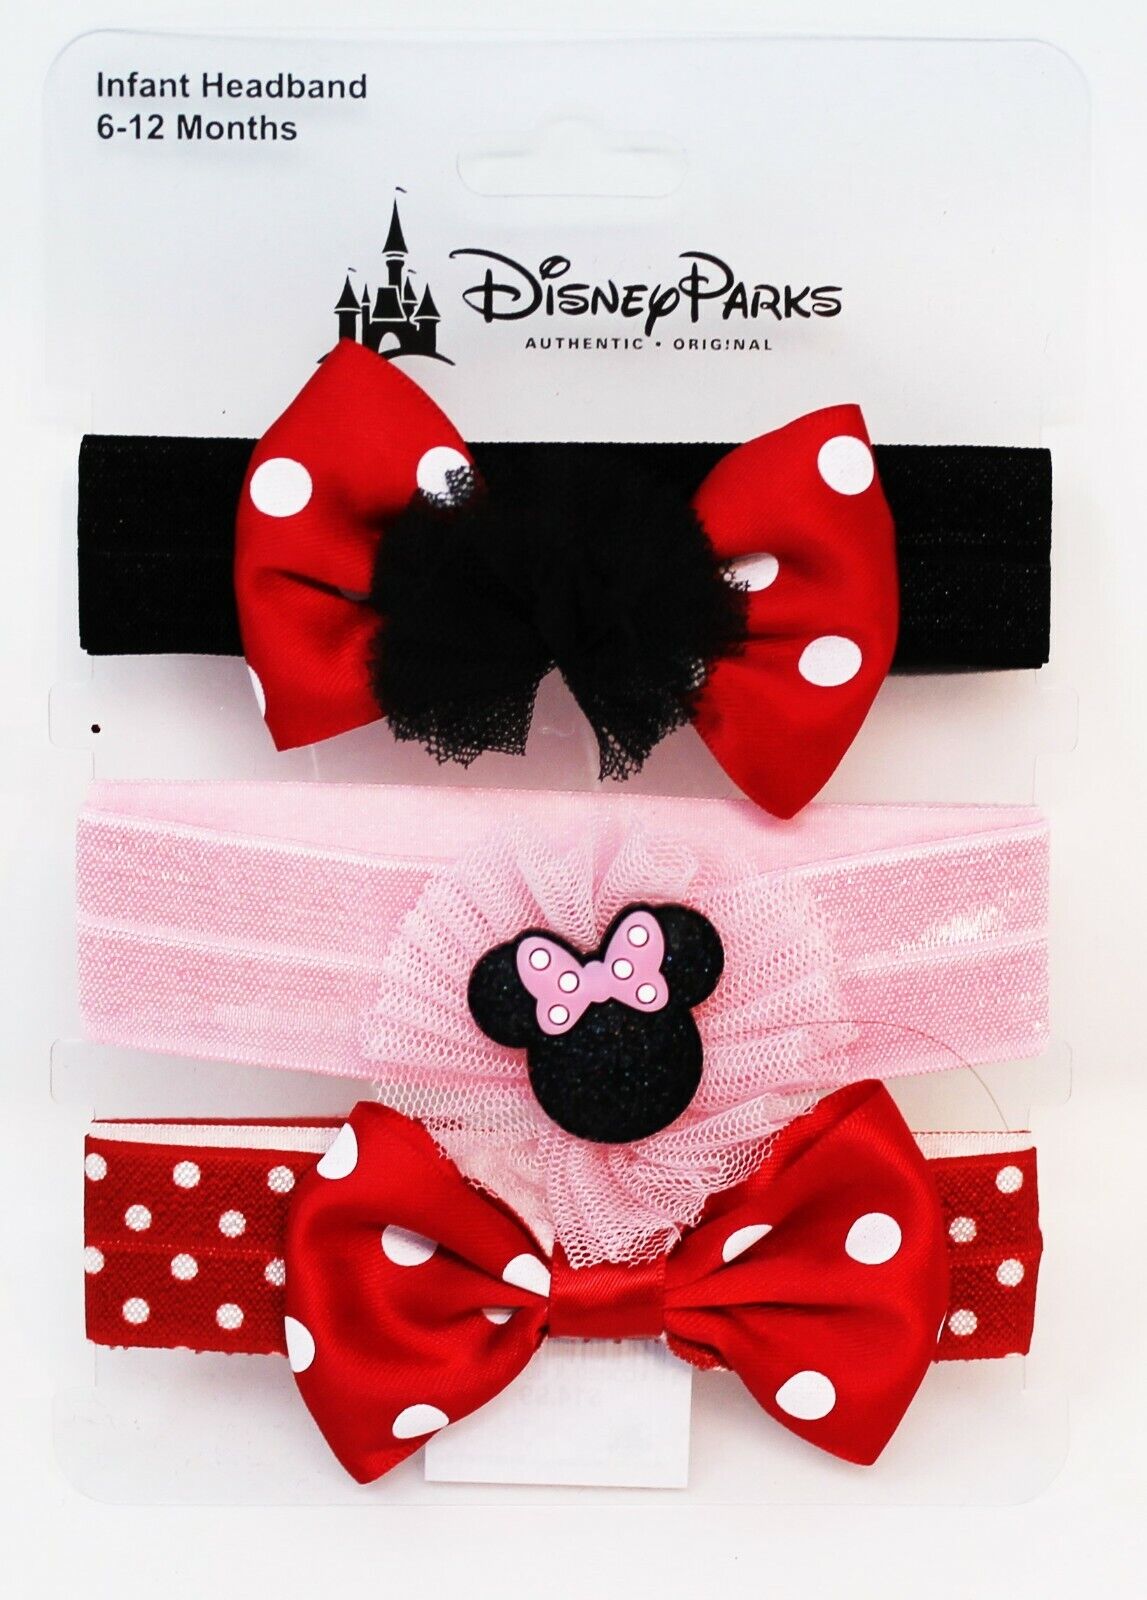 Disney Parks Infant Baby Child Girls Headband Head Band 3 Pack 6-12 Months NEW